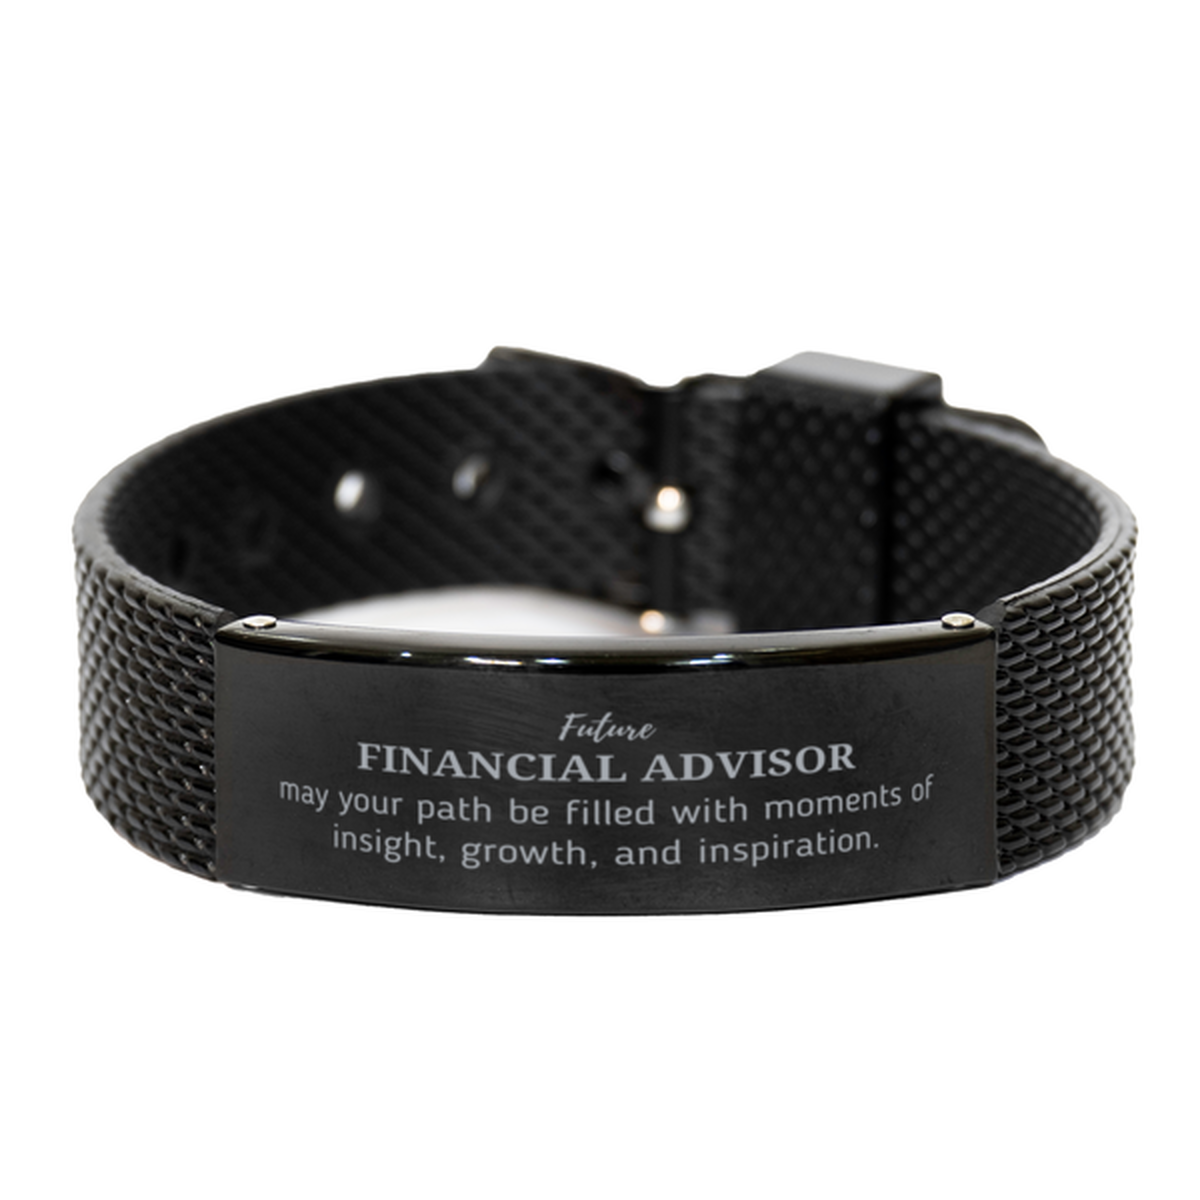 Future Financial Advisor Gifts, May your path be filled with moments of insight, Graduation Gifts for New Financial Advisor, Christmas Unique Black Shark Mesh Bracelet For Men, Women, Friends